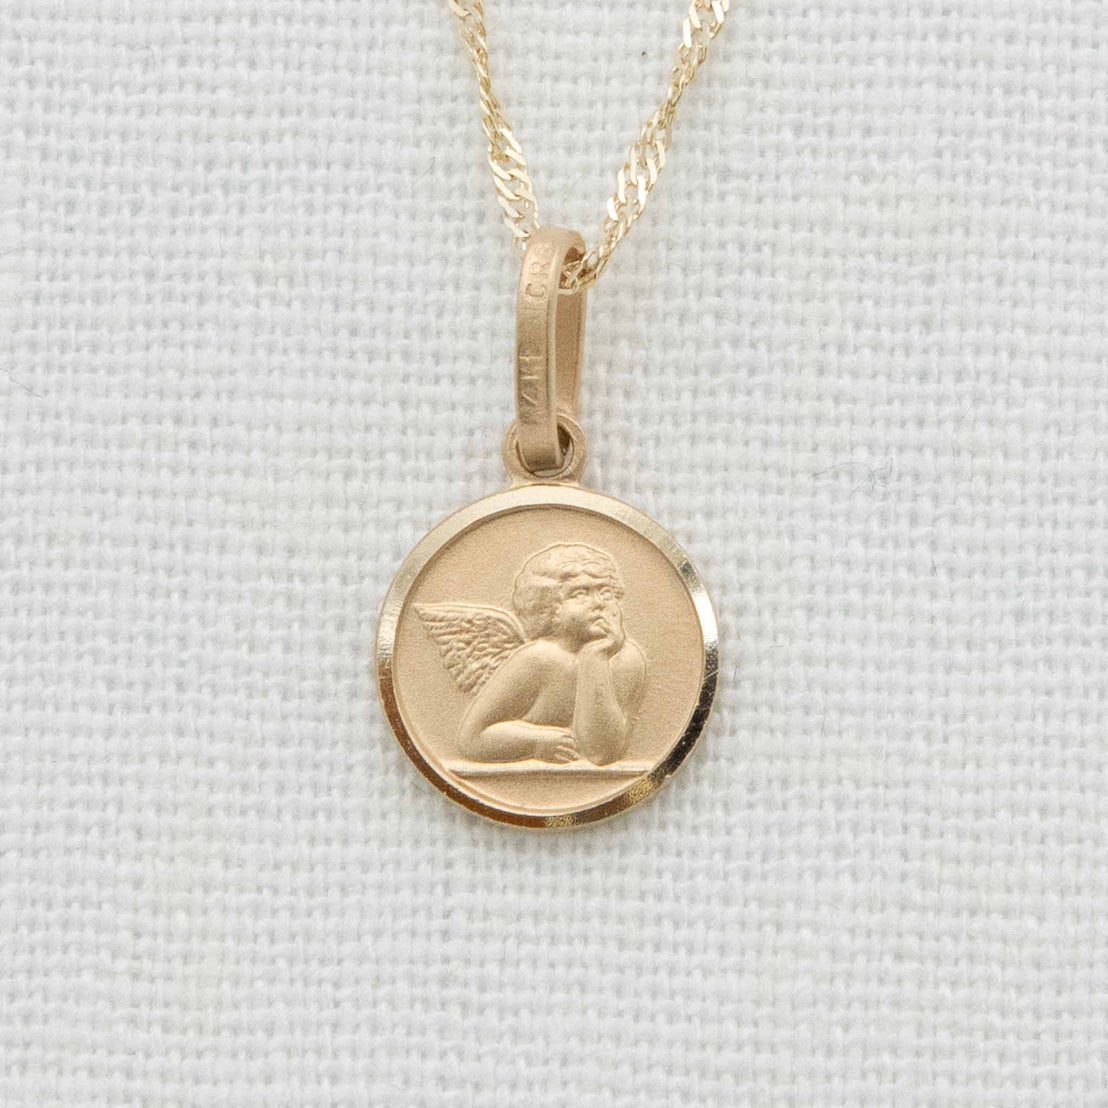 Solid gold angel charm with chain necklace